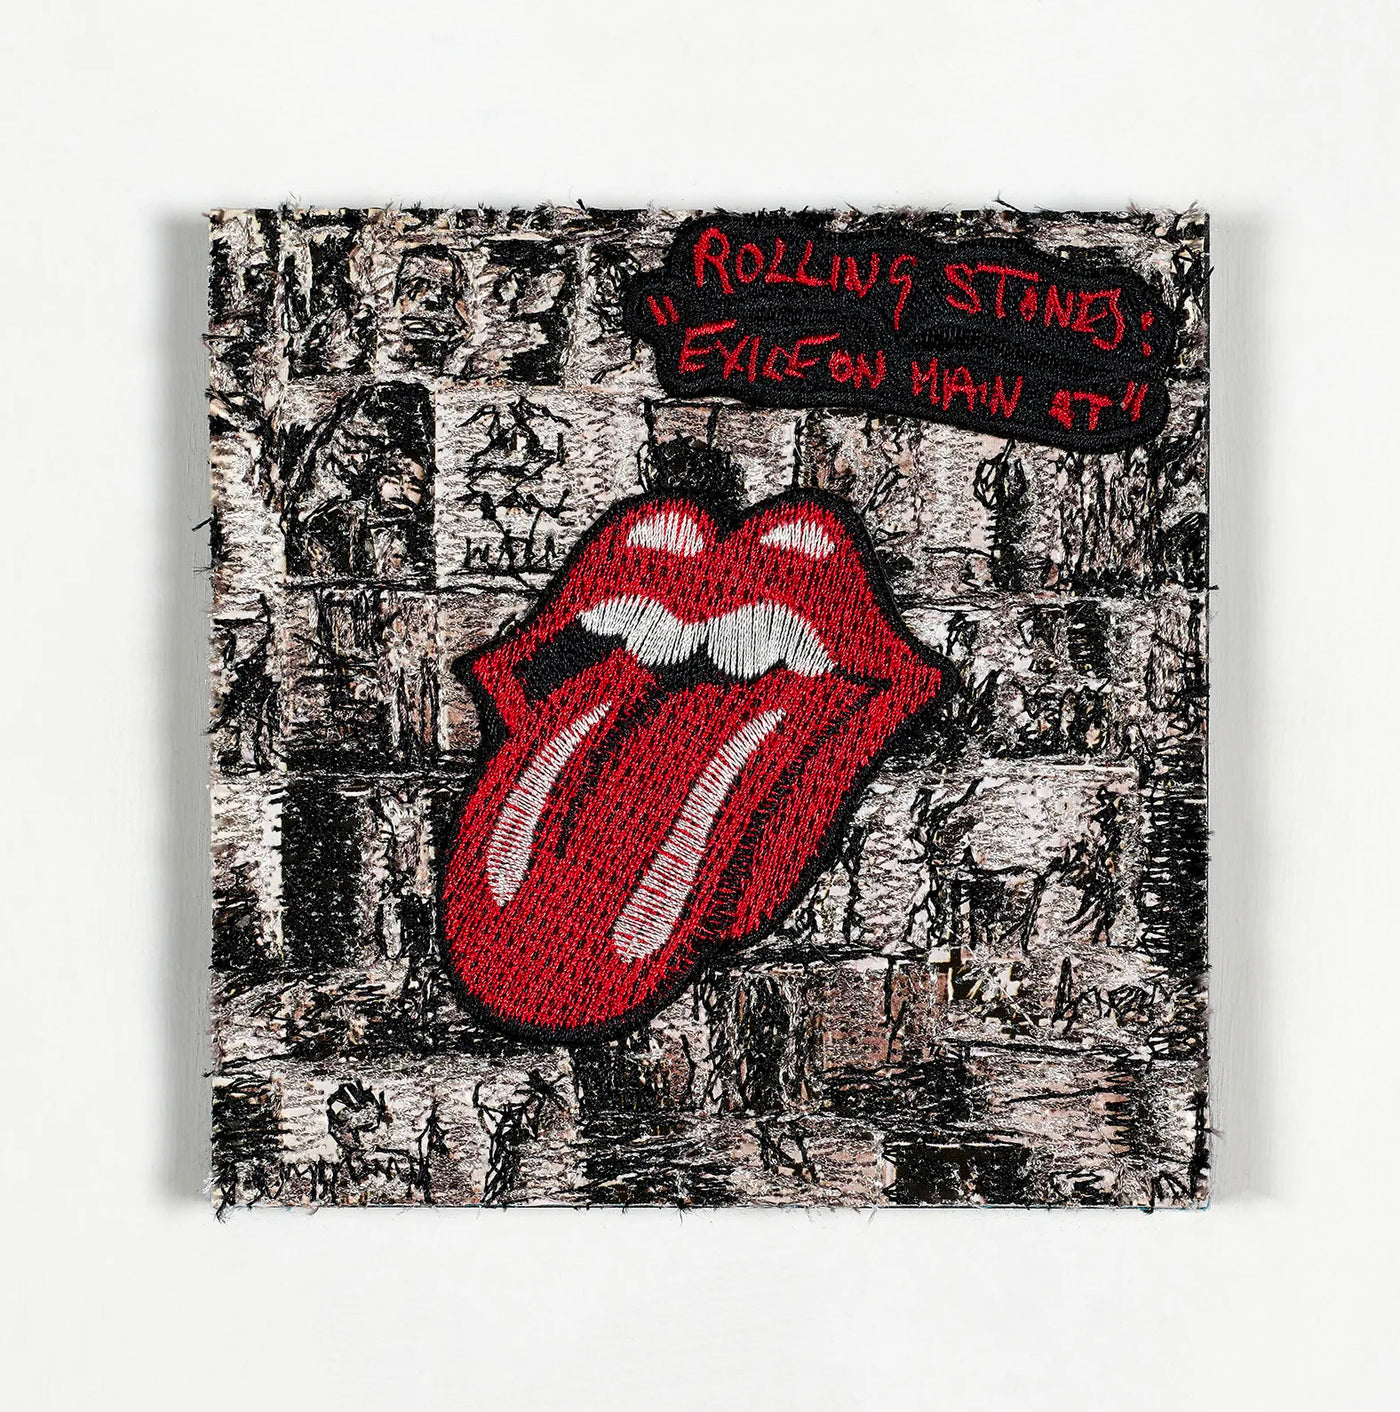 Exile On Main St - Rolling Stones